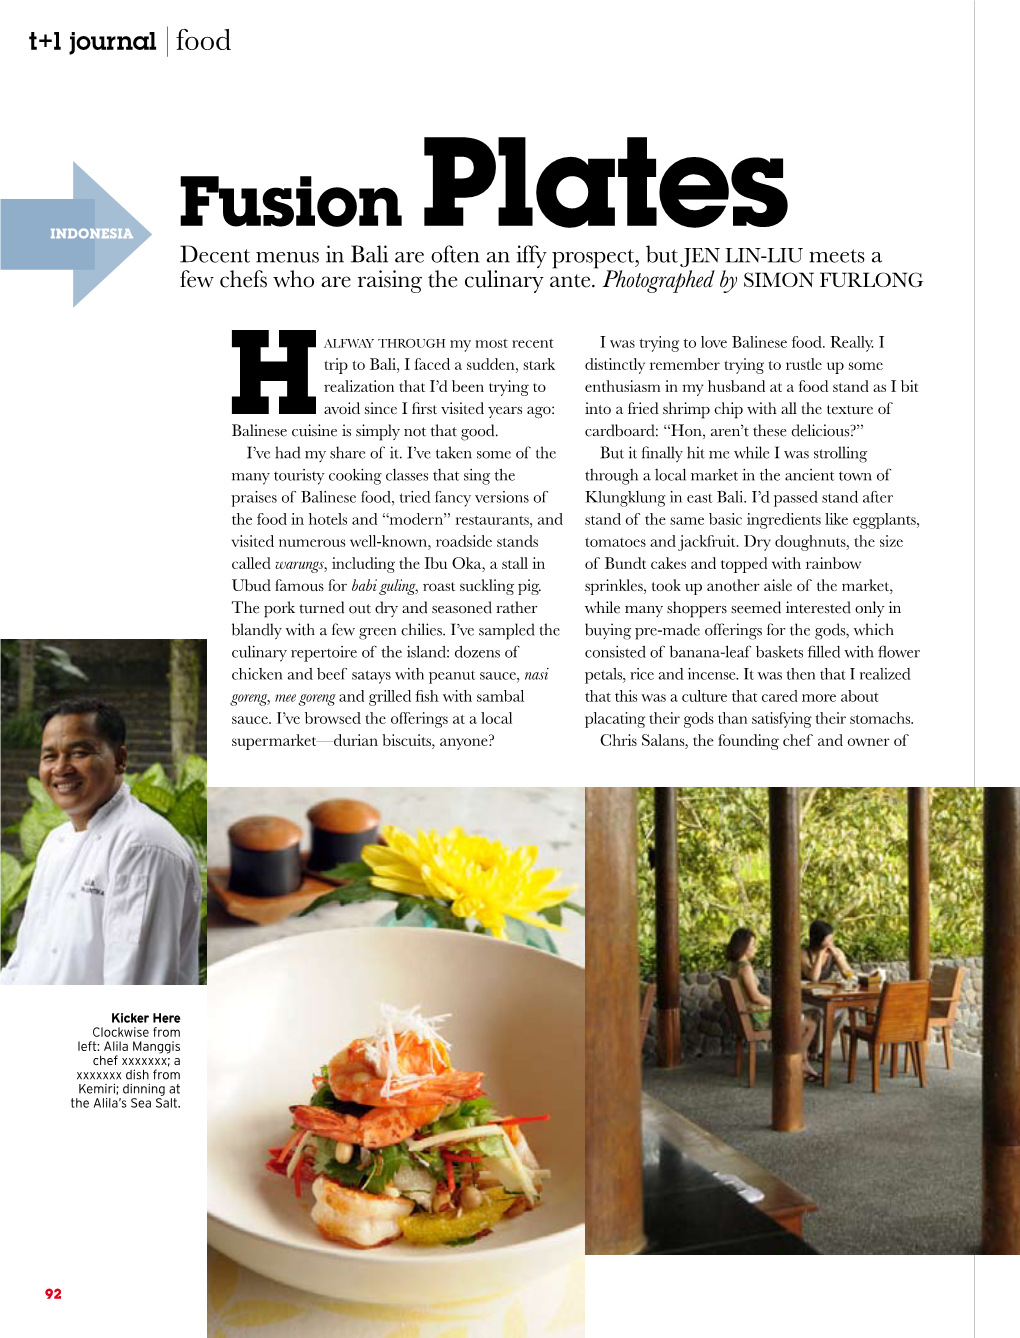 Fusion Plates Decent Menus in Bali Are Often an Iffy Prospect, but JEN LIN-LIU Meets a Few Chefs Who Are Raising the Culinary Ante